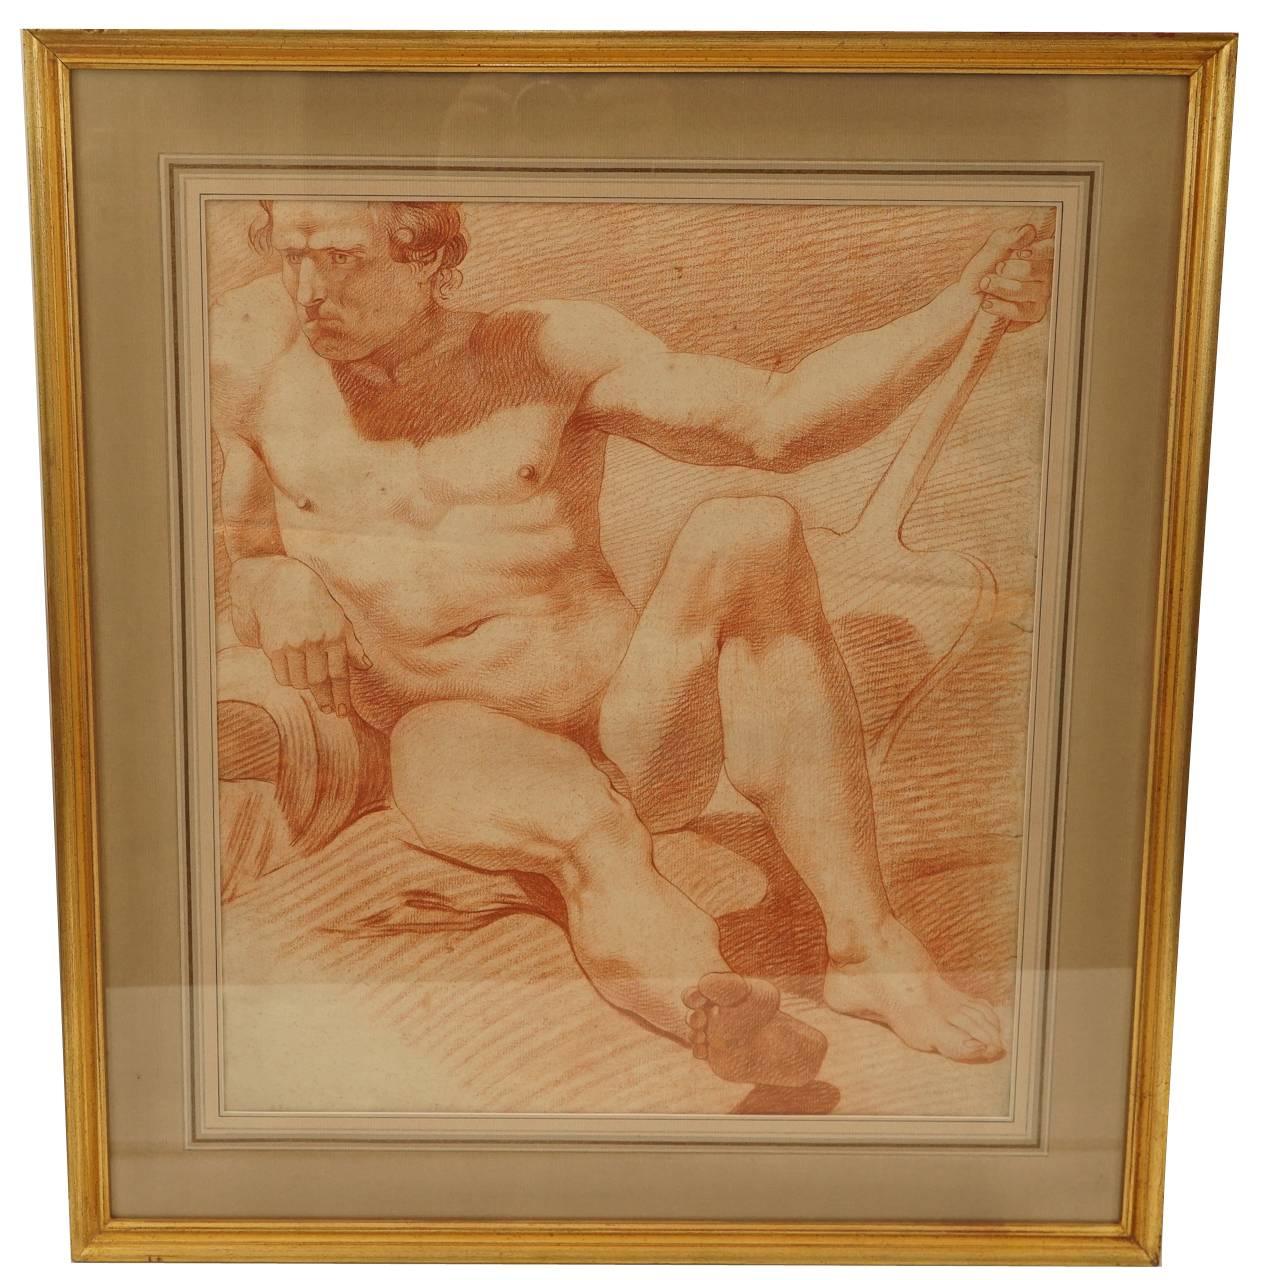 Fine Large Late 18th Century or Early 19th Century French Academic Drawing